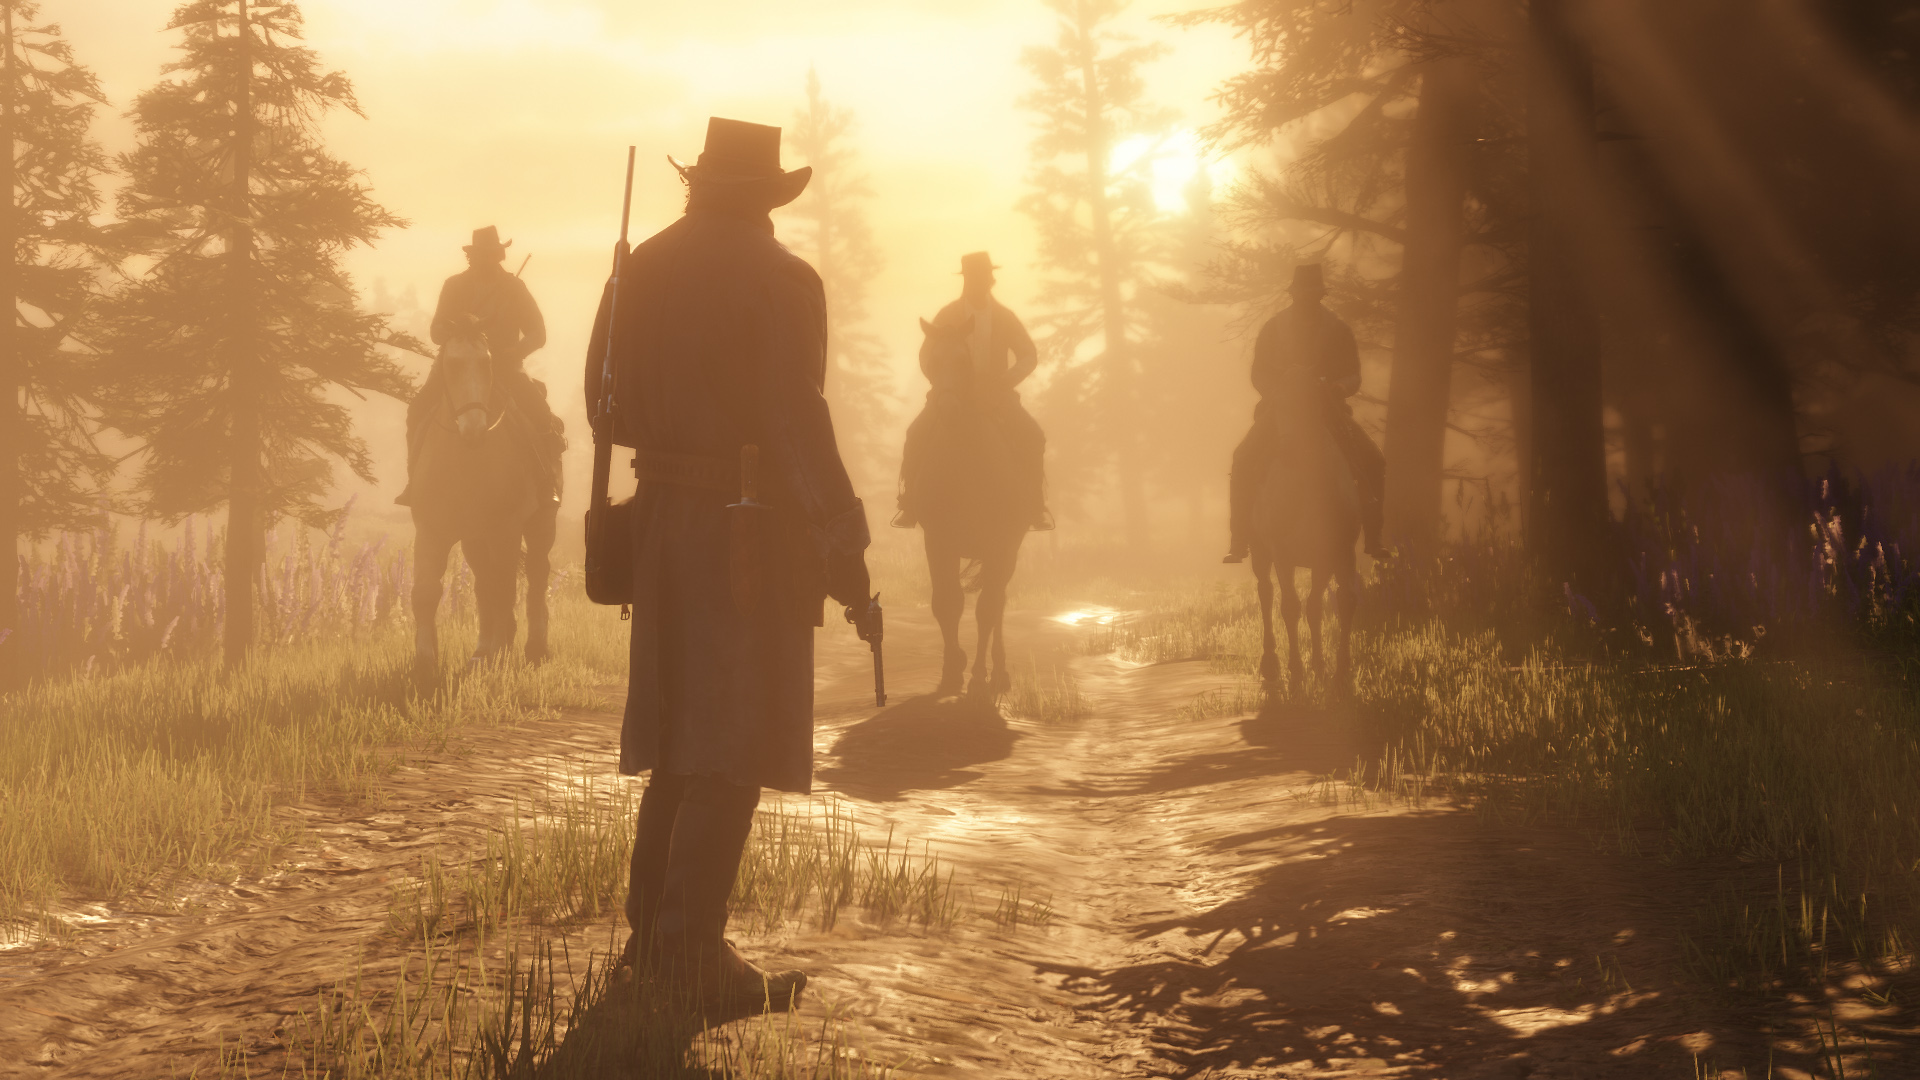 A Recent Next-Gen Red Dead Redemption 2 Leak Appears to be Fake